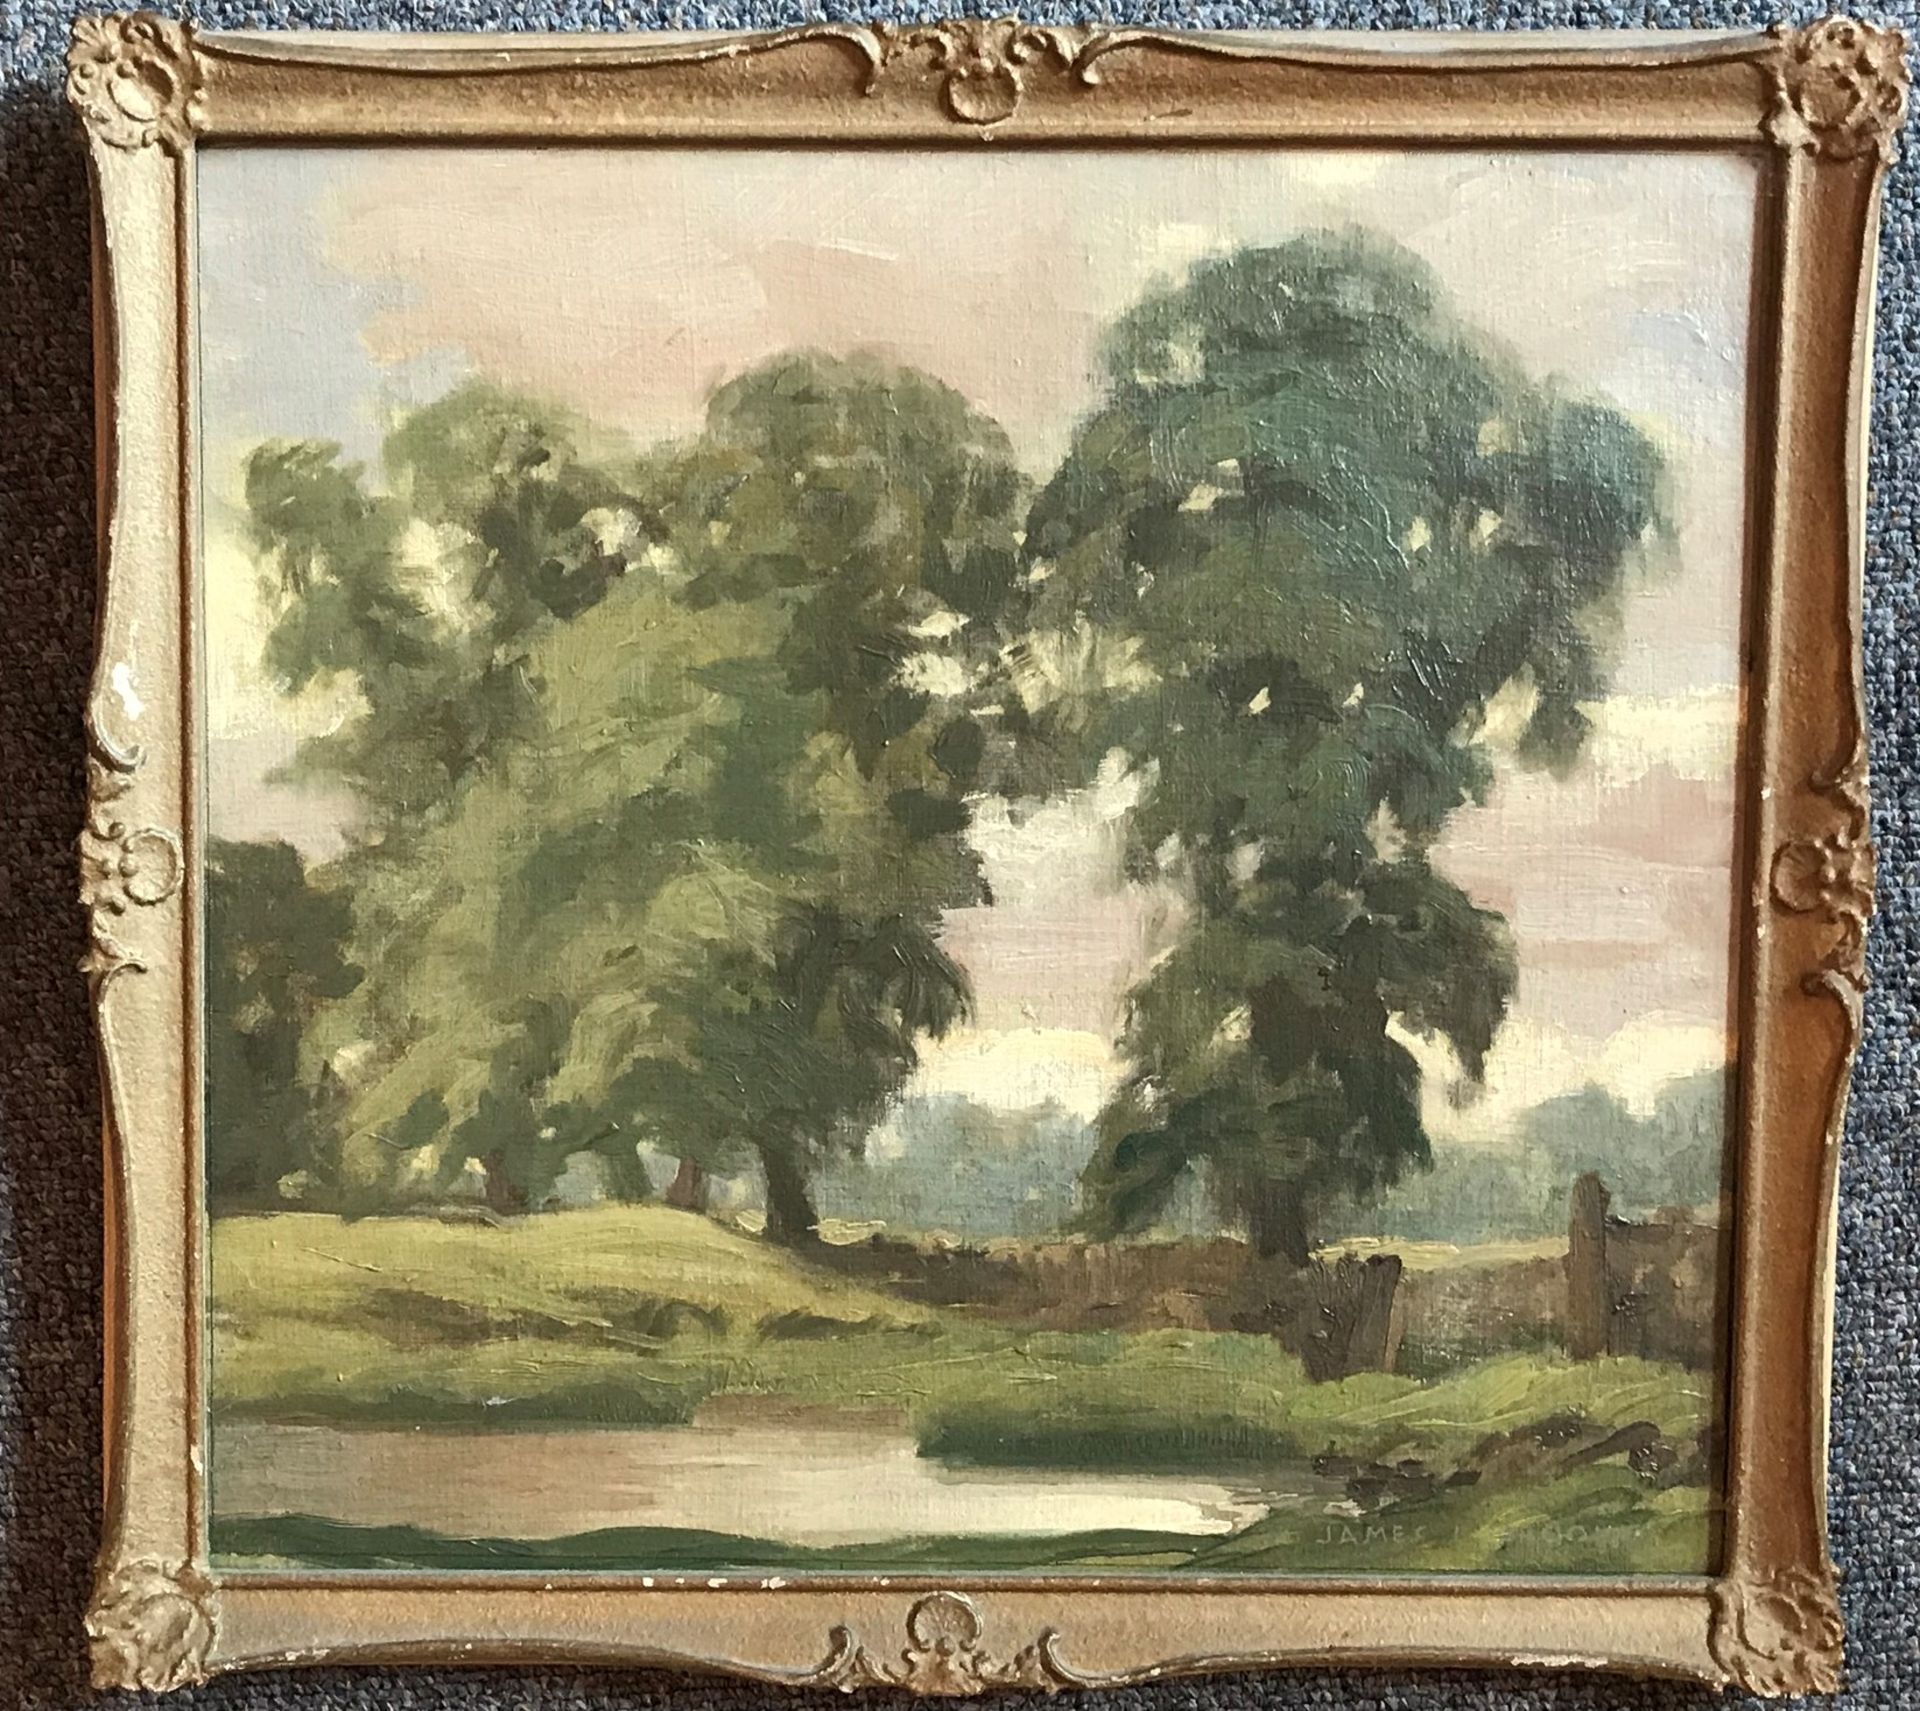 James L Brooke Signed Oil On Canvas "Elms In August"